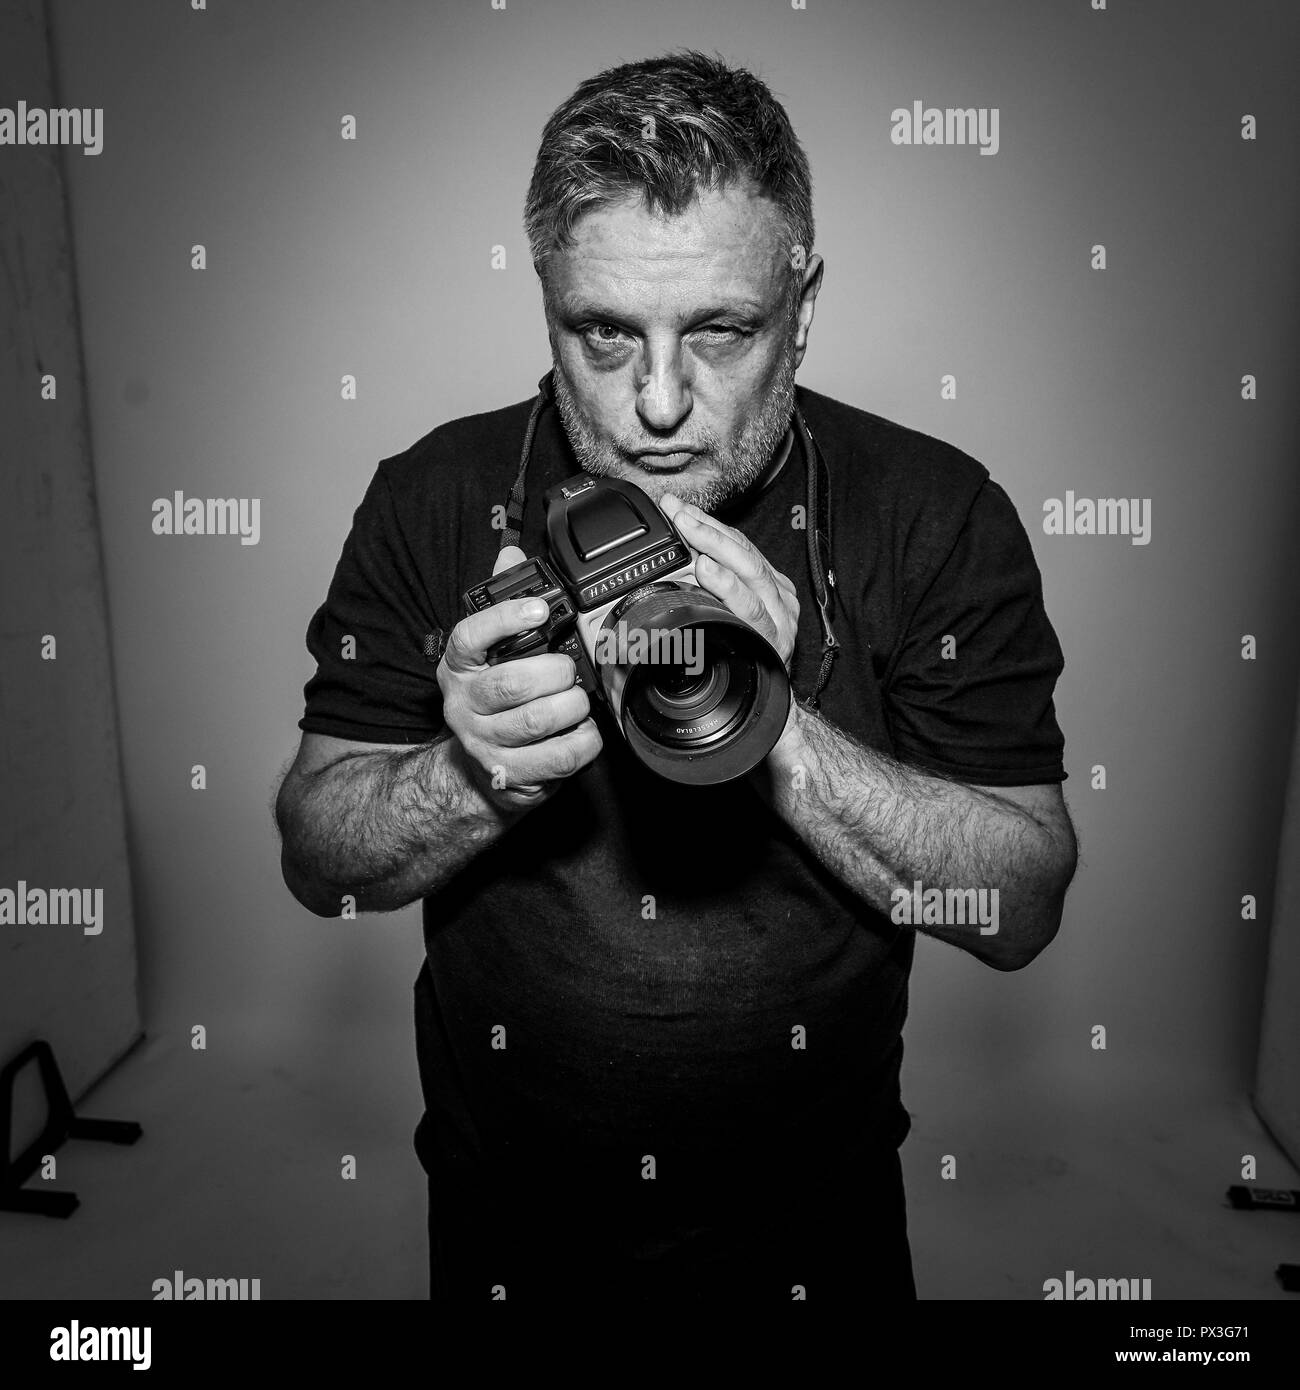 Berlin, Deutschland. 17th Oct, 2018. EXCLUSIVE: 17.10.2018, top photographer  John Rankin Waddell 'Rankin' was booked at the BOMBAY SAPPHIRE Canvas Bar  in Berlin. Exclusive portrait of photographer with his Hasselblad camera in